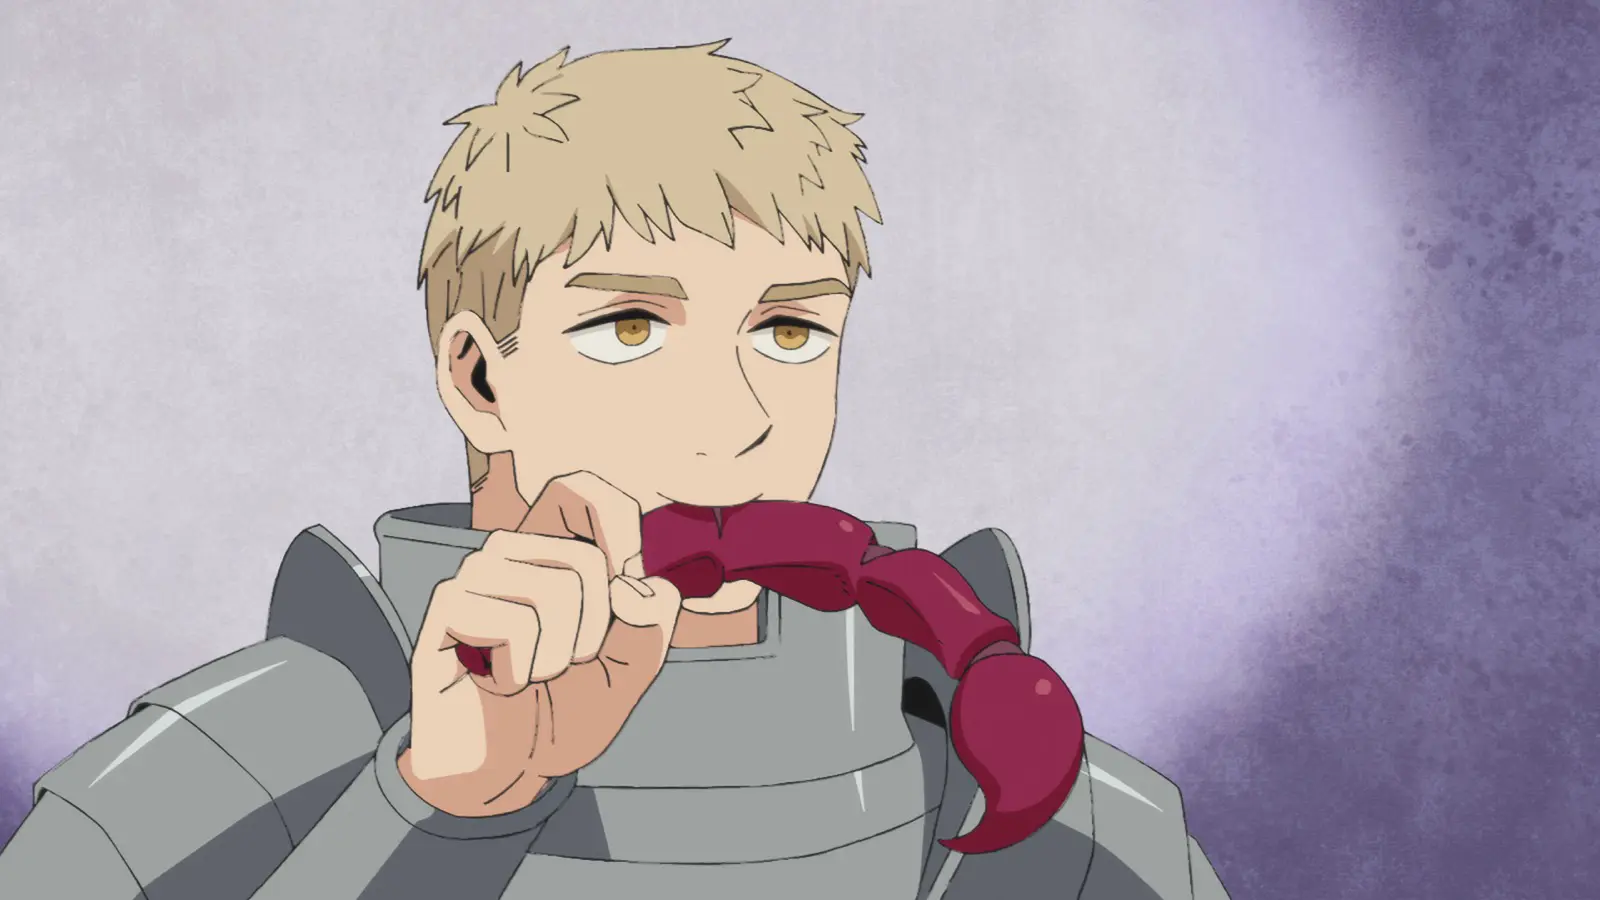 Delicious in Dungeon - Episode 1 Preview